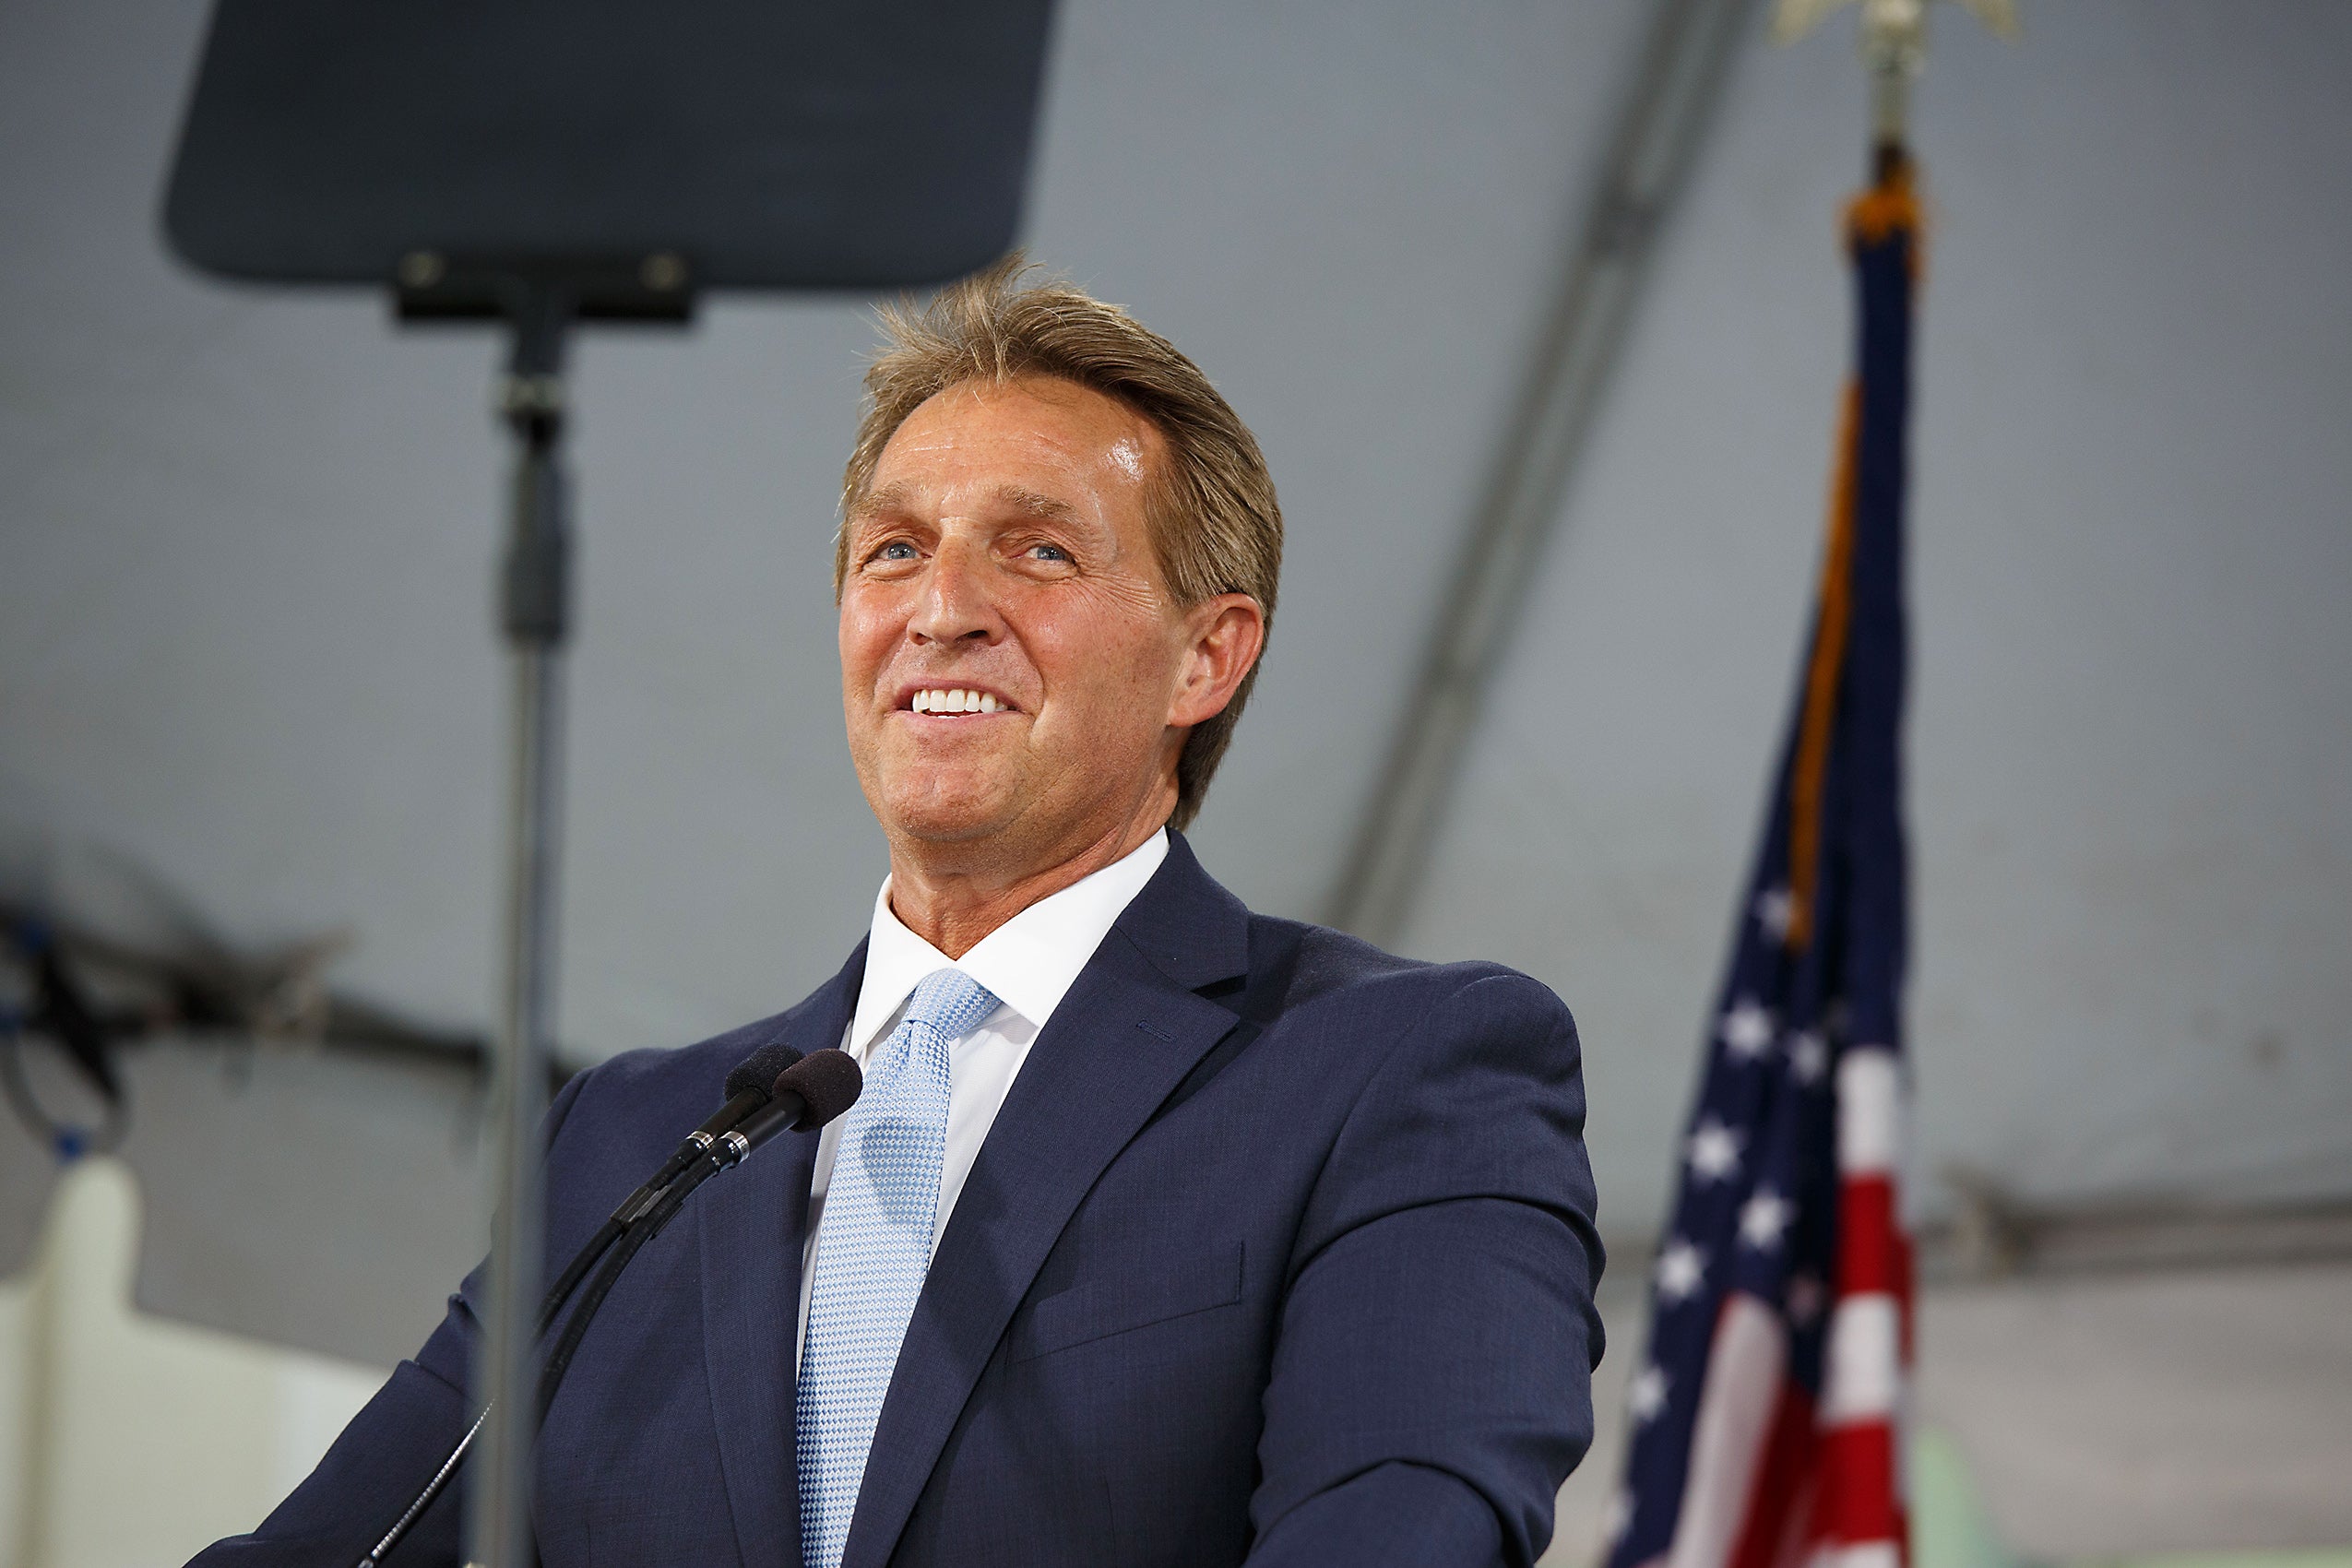 Sen. Flake challenges Class of 2018 to protect the rule of law 1